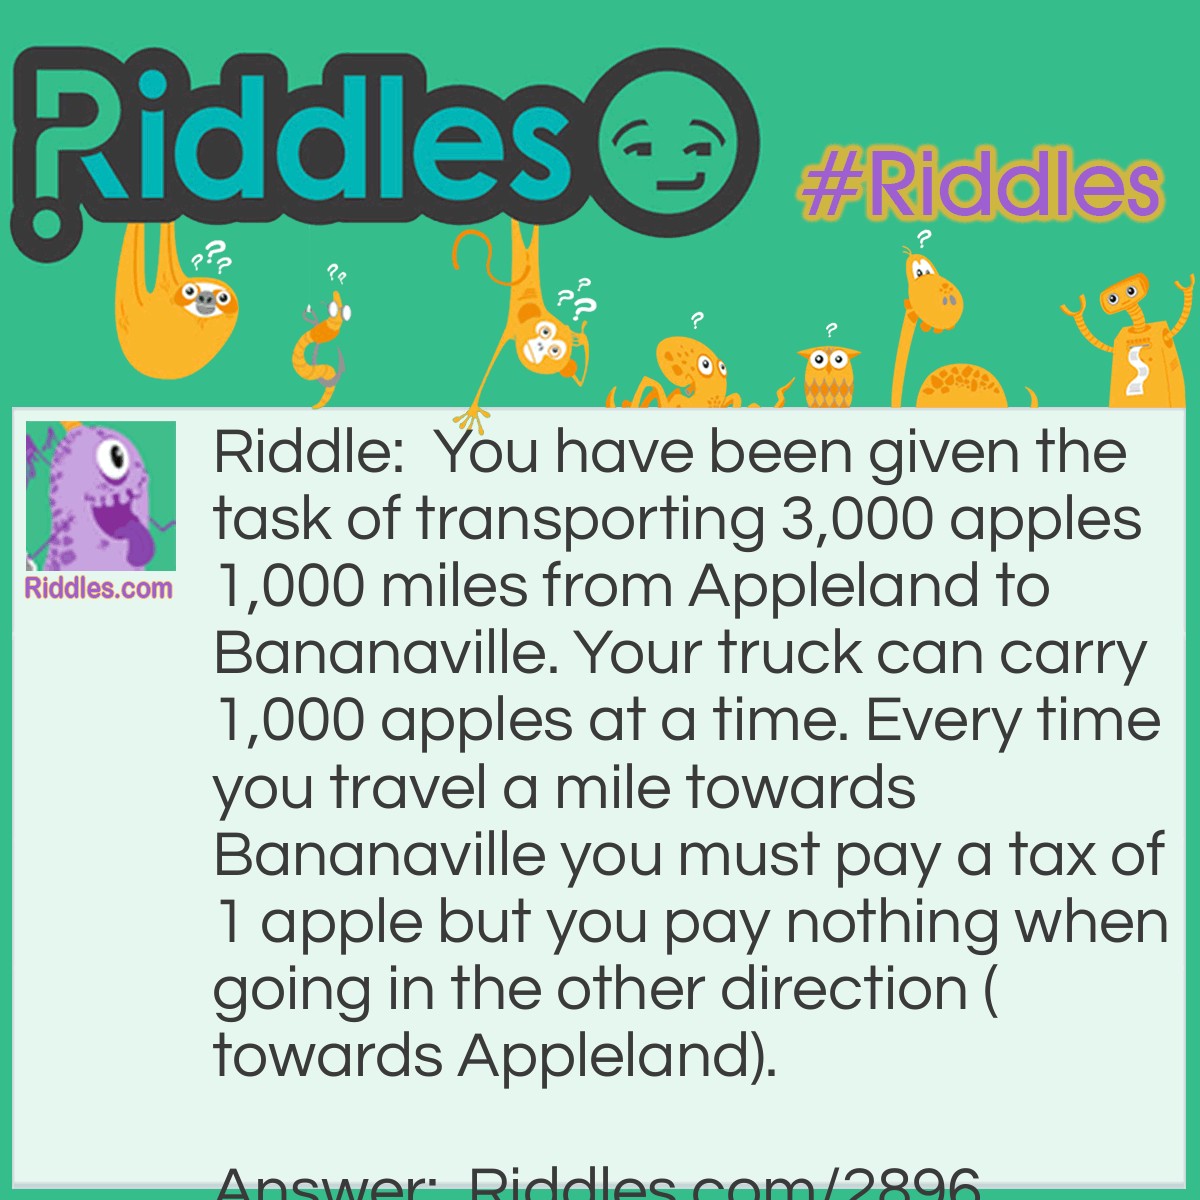 Riddle: You have been given the task of transporting 3,000 apples 1,000 miles from Appleland to Bananaville. Your truck can carry 1,000 apples at a time. Every time you travel a mile towards Bananaville you must pay a tax of 1 apple but you pay nothing when going in the other direction (towards Appleland).
What is the least amount of apples you need to pay. How is that possible? Answer: 833 apples.
Step one: First you want to make 3 trips of 1,000 apples 333 miles.You will be left with 2,001 apples and 667 miles to go.
Step two: Next you want to take 2 trips of 1,000 apples 500 miles. You will be left with 1,000 apples and 167 miles to go (you have to leave an apple behind).
Step three: Finally, you travel the last 167 miles with one load of 1,000 apples and are left with 833 apples in Bananaville.